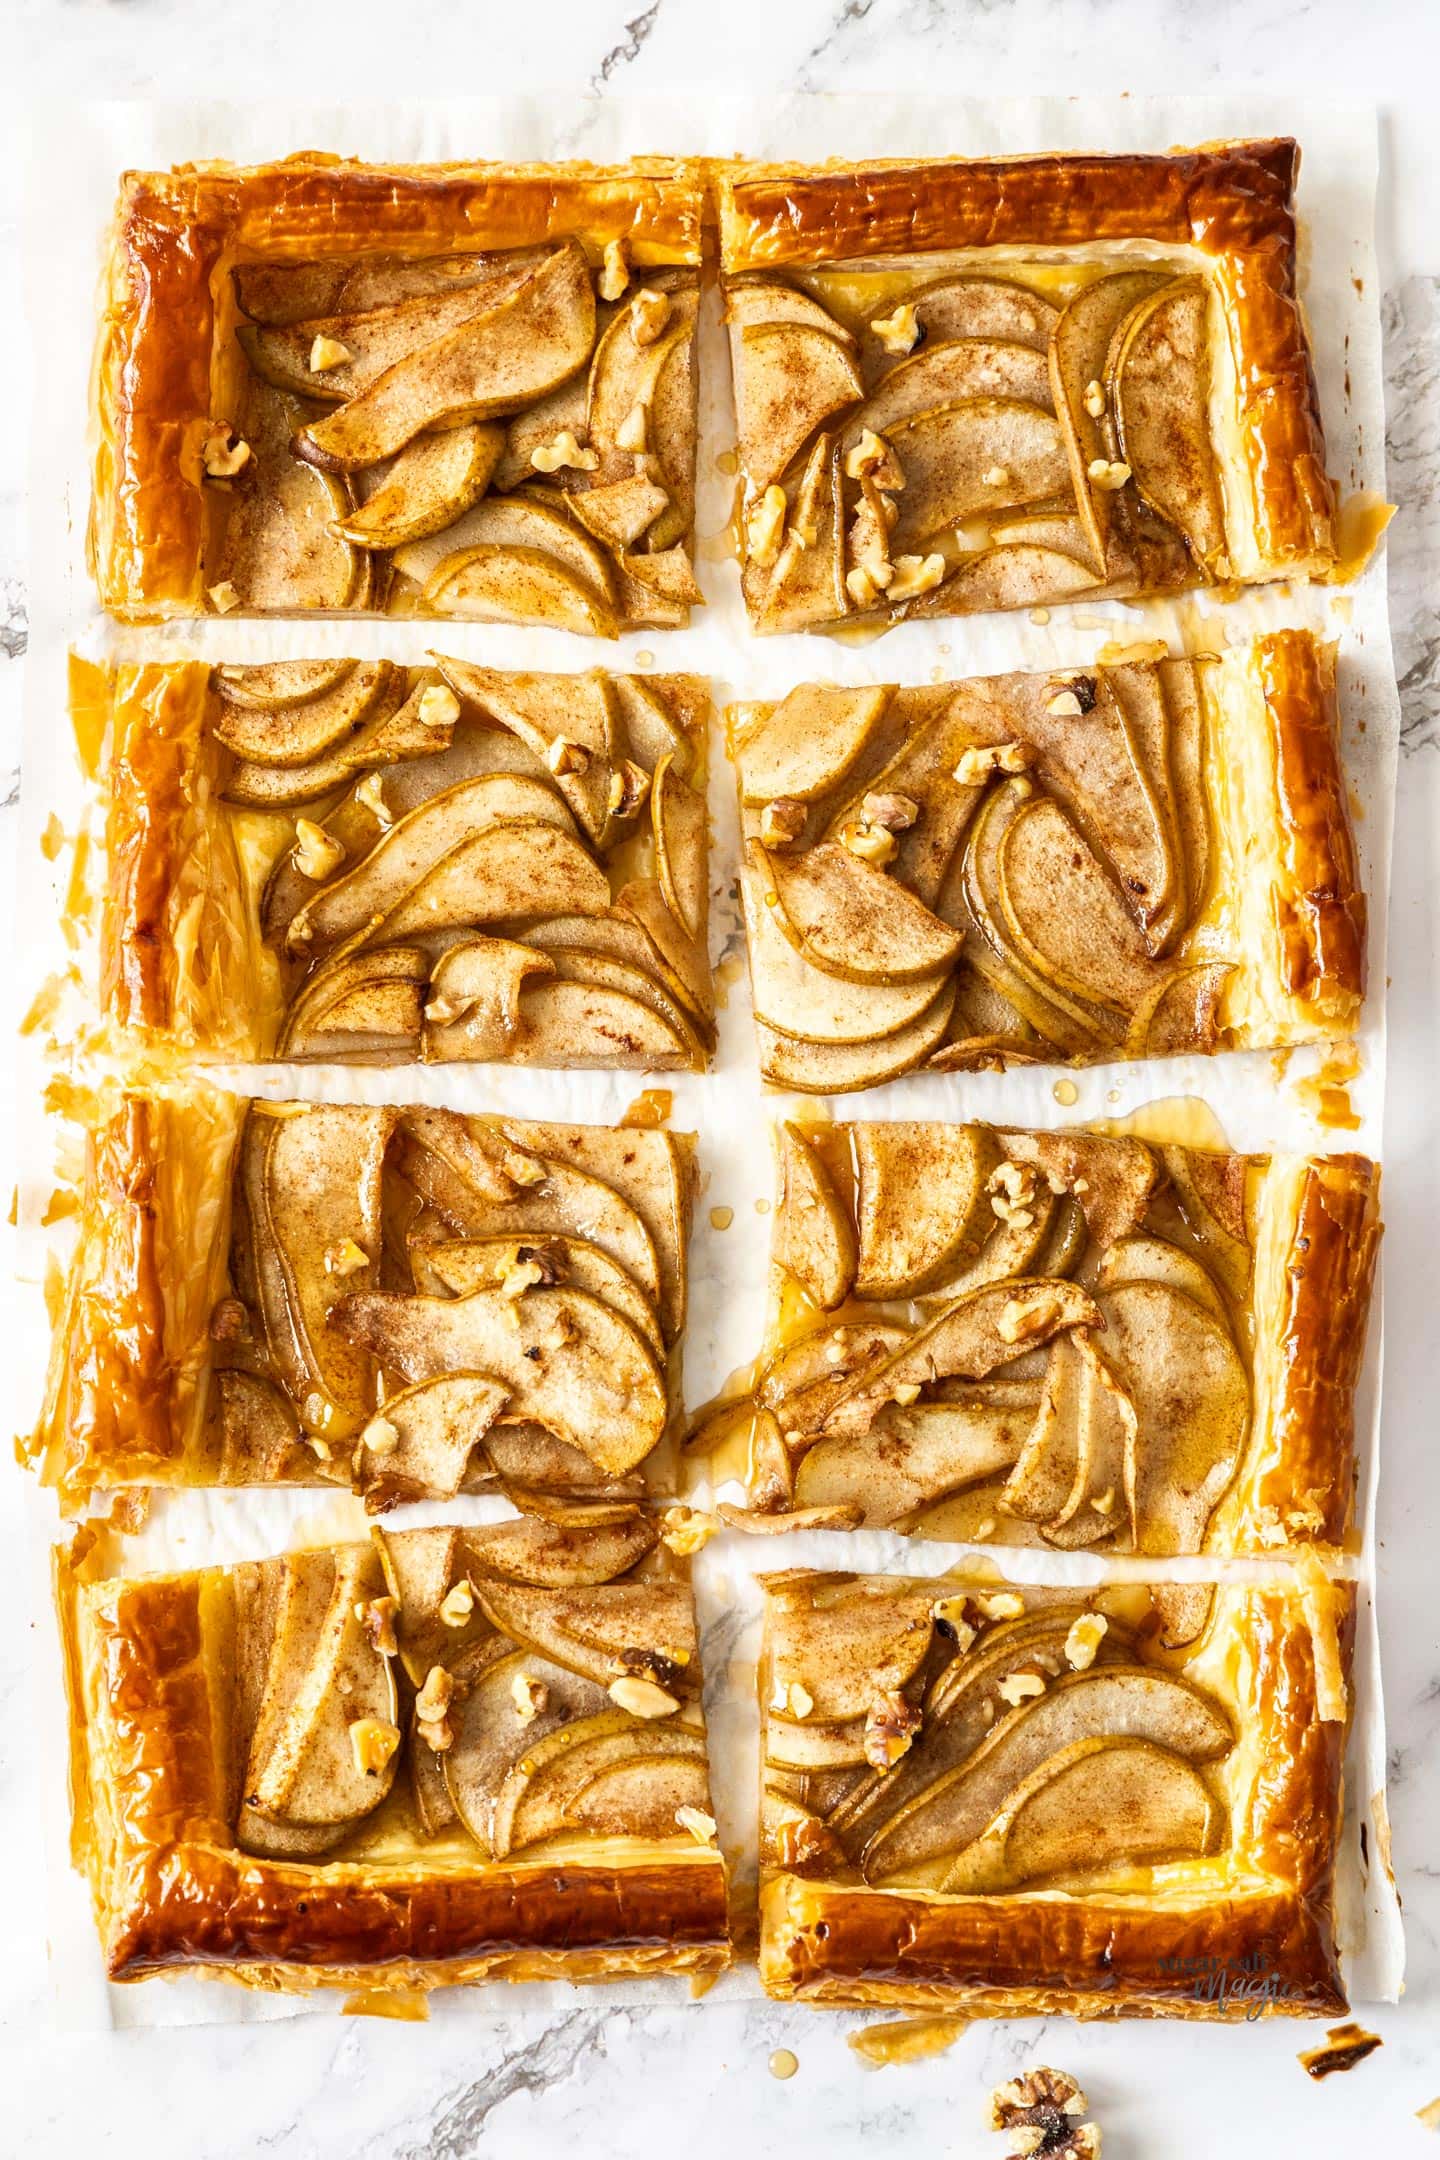 A puff pastry pear tart sliced into 8 pieces.